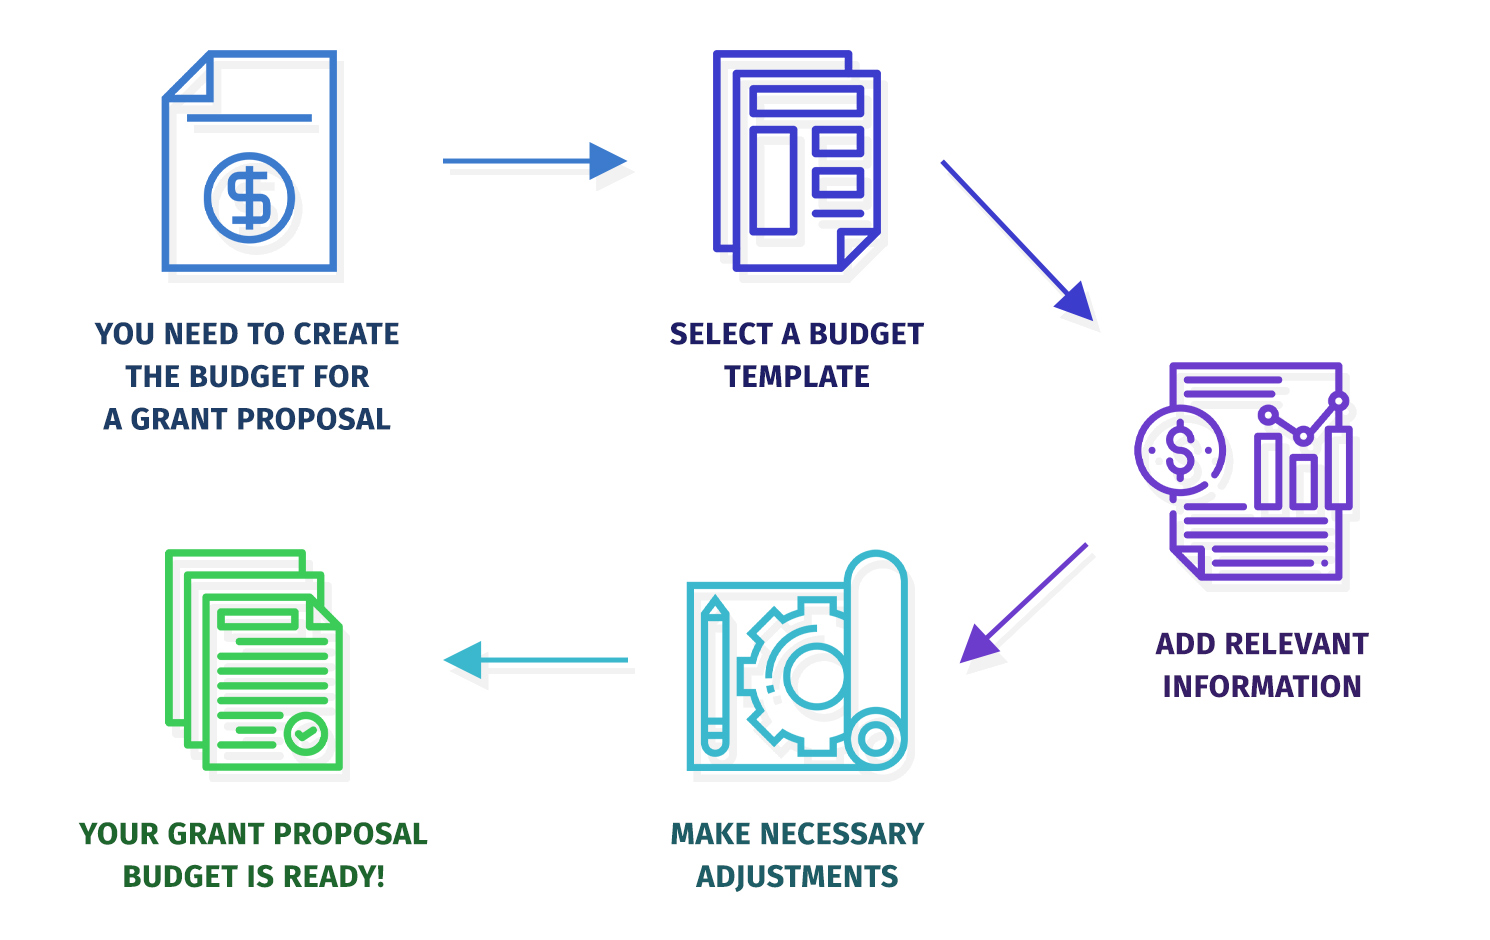 Grant proposal budget template